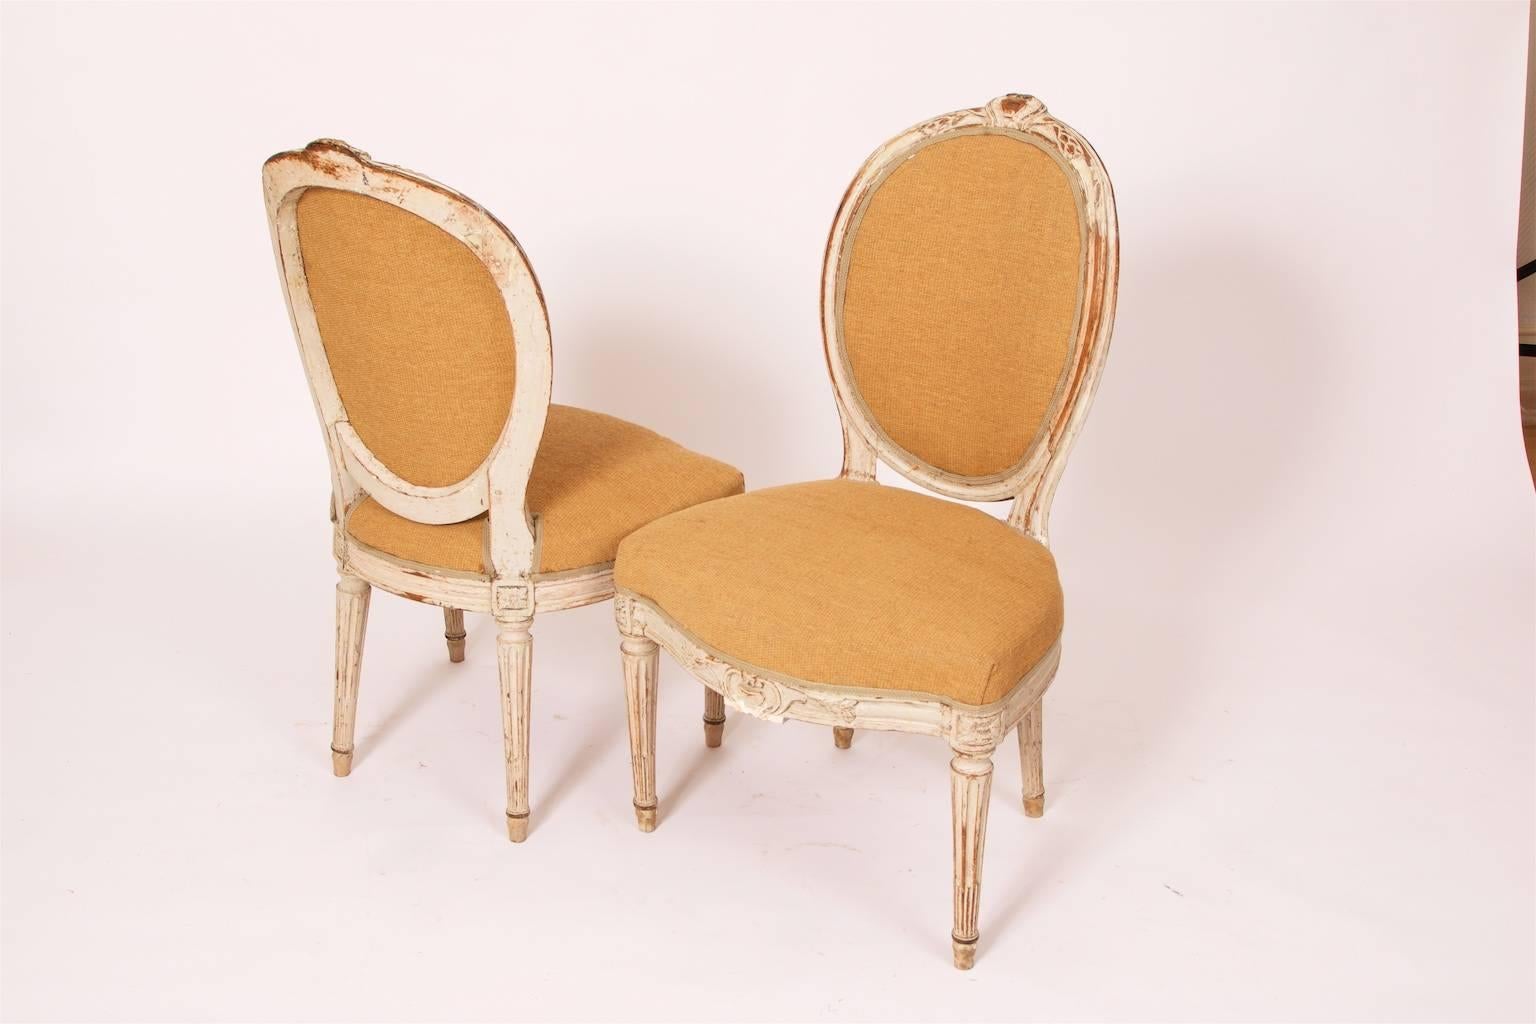 Mid-18th Century Pair of Georges Jacob Chairs, Paris, France, Louis XVI-Style, Stamped circa 1765 For Sale